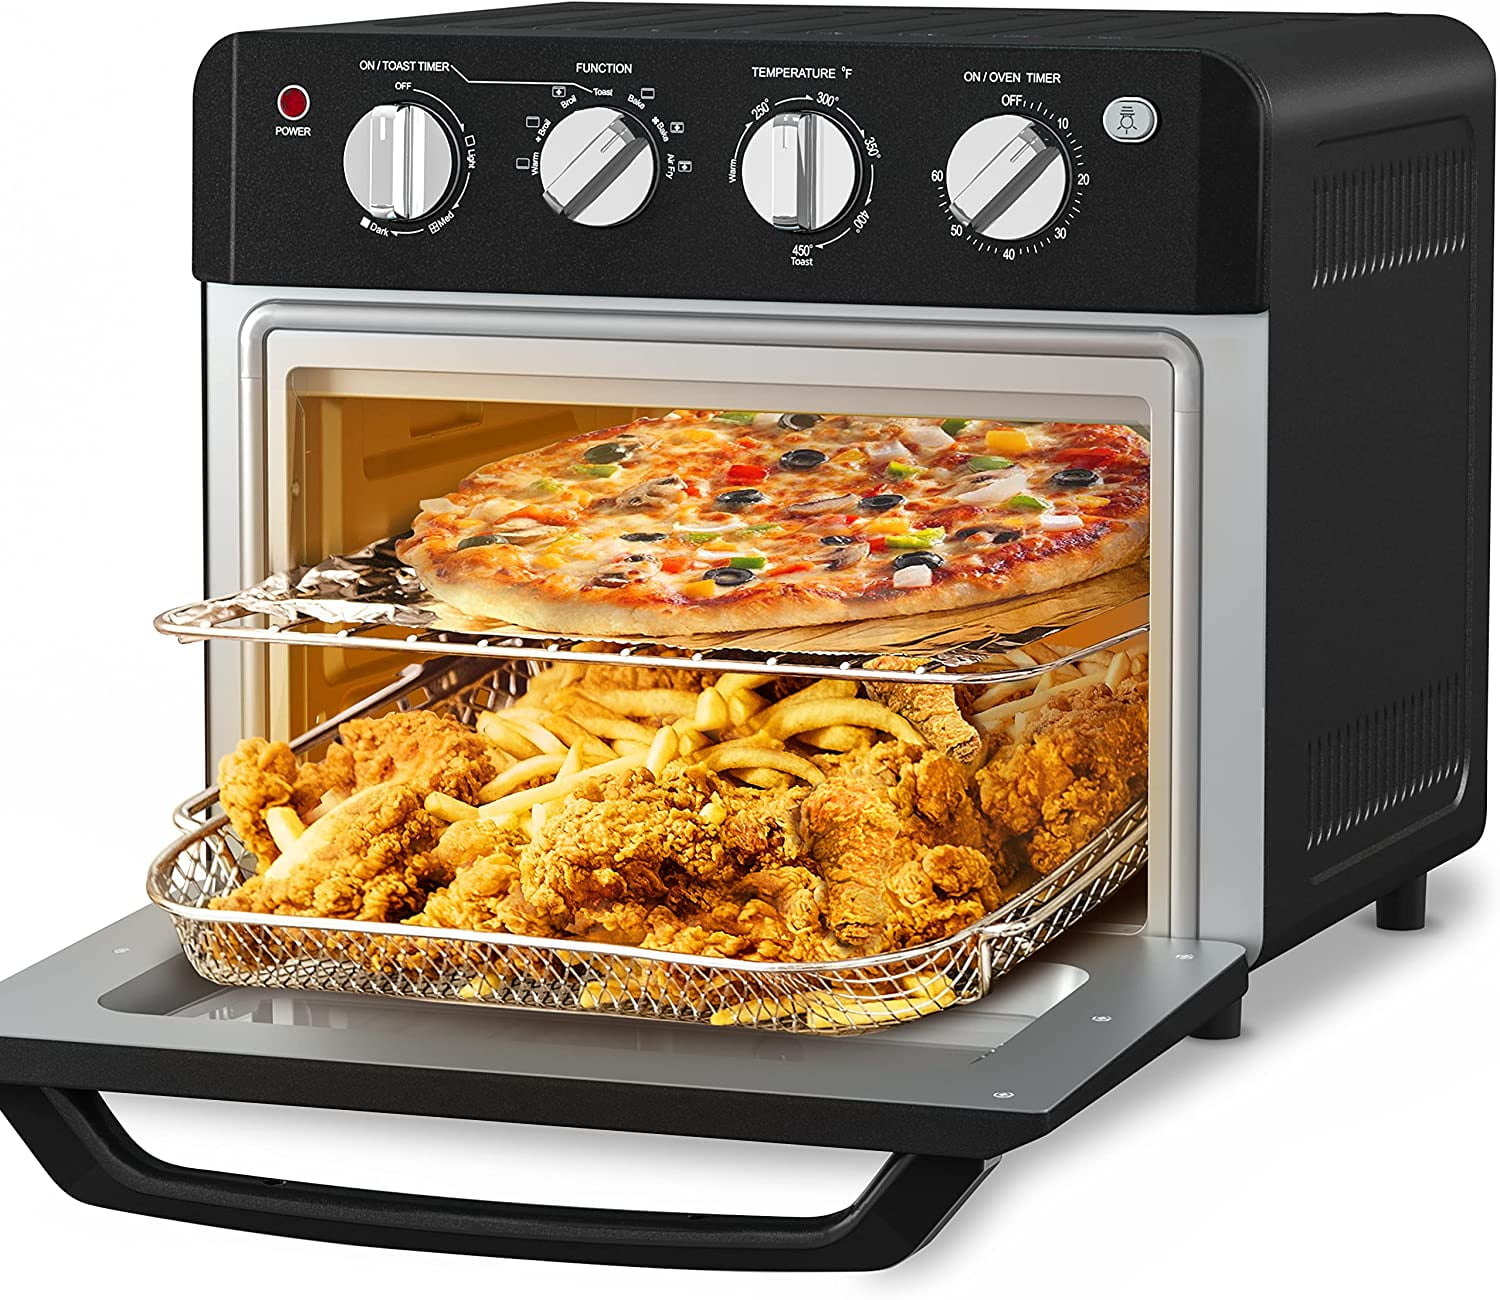 Elexnux 14 qt. Black Air Fryer Toaster Oven Combo,4 Slice Toaster  Convection Air Fryer Oven Warm, 16 in 1 Digital Easy Operation  GBK-RA22091501 - The Home Depot